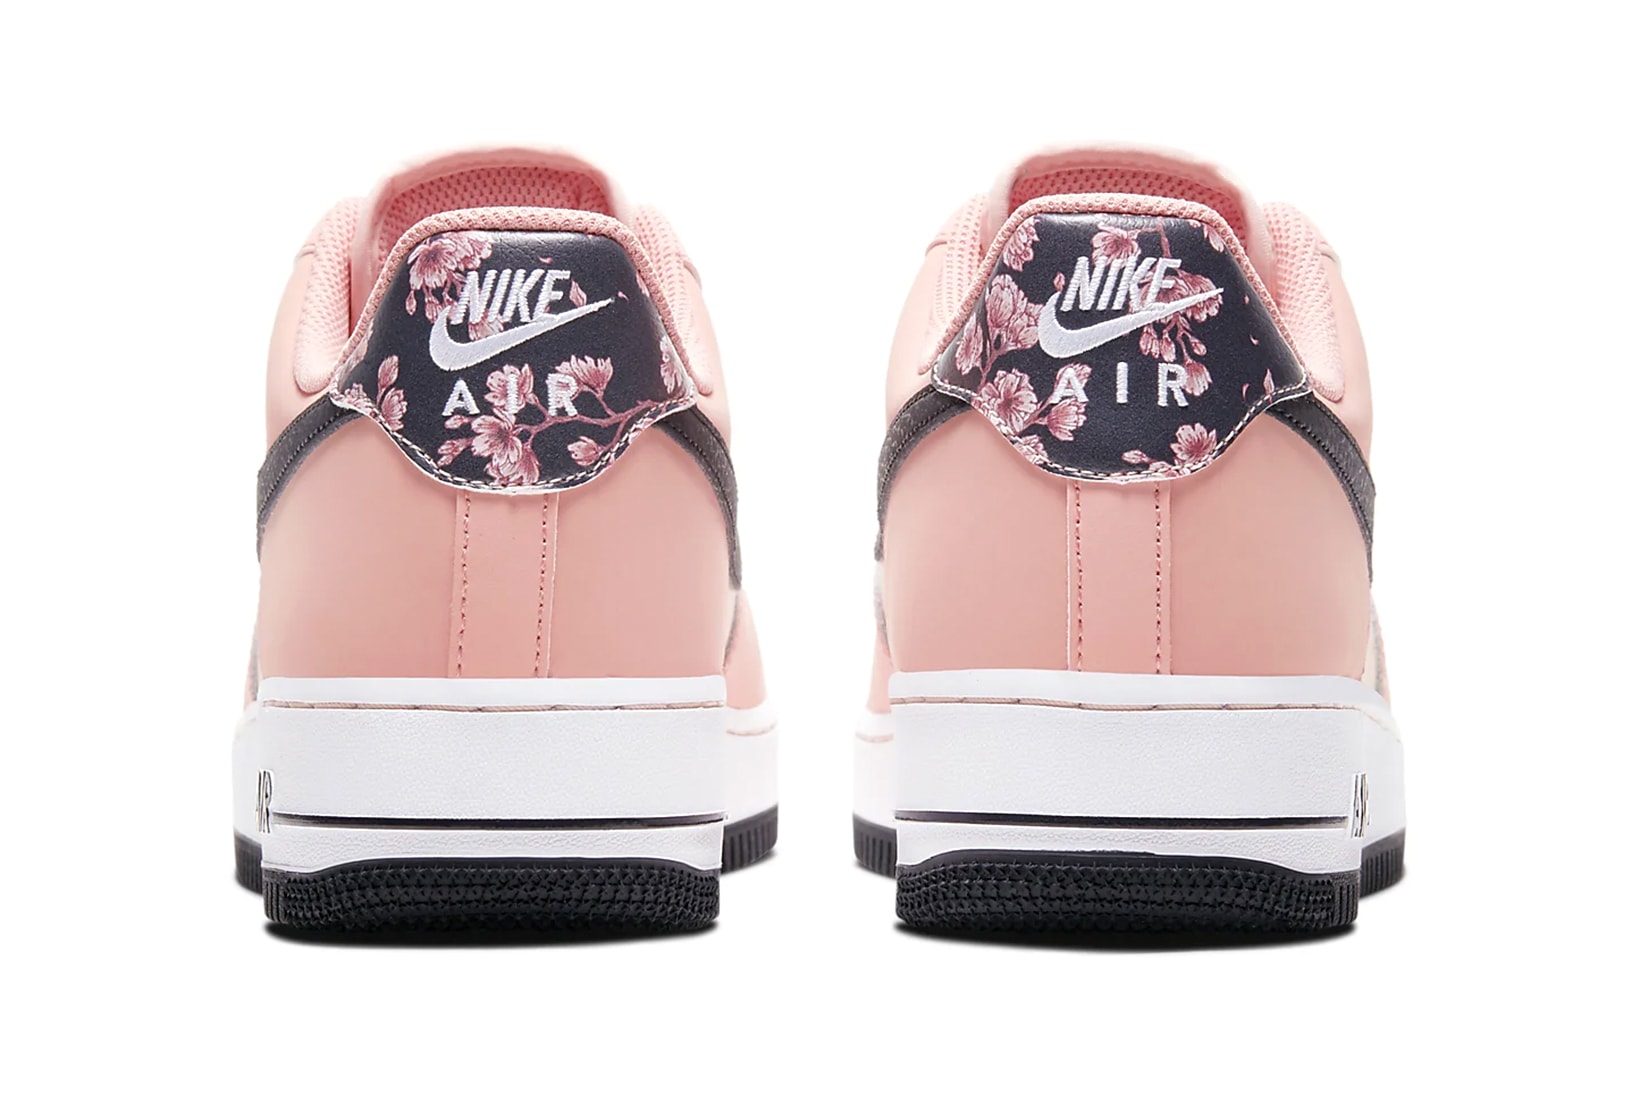 nike air force 1 07 limited edition sneakers japanese cherry blossoms pink white black shoes footwear sneakerhead